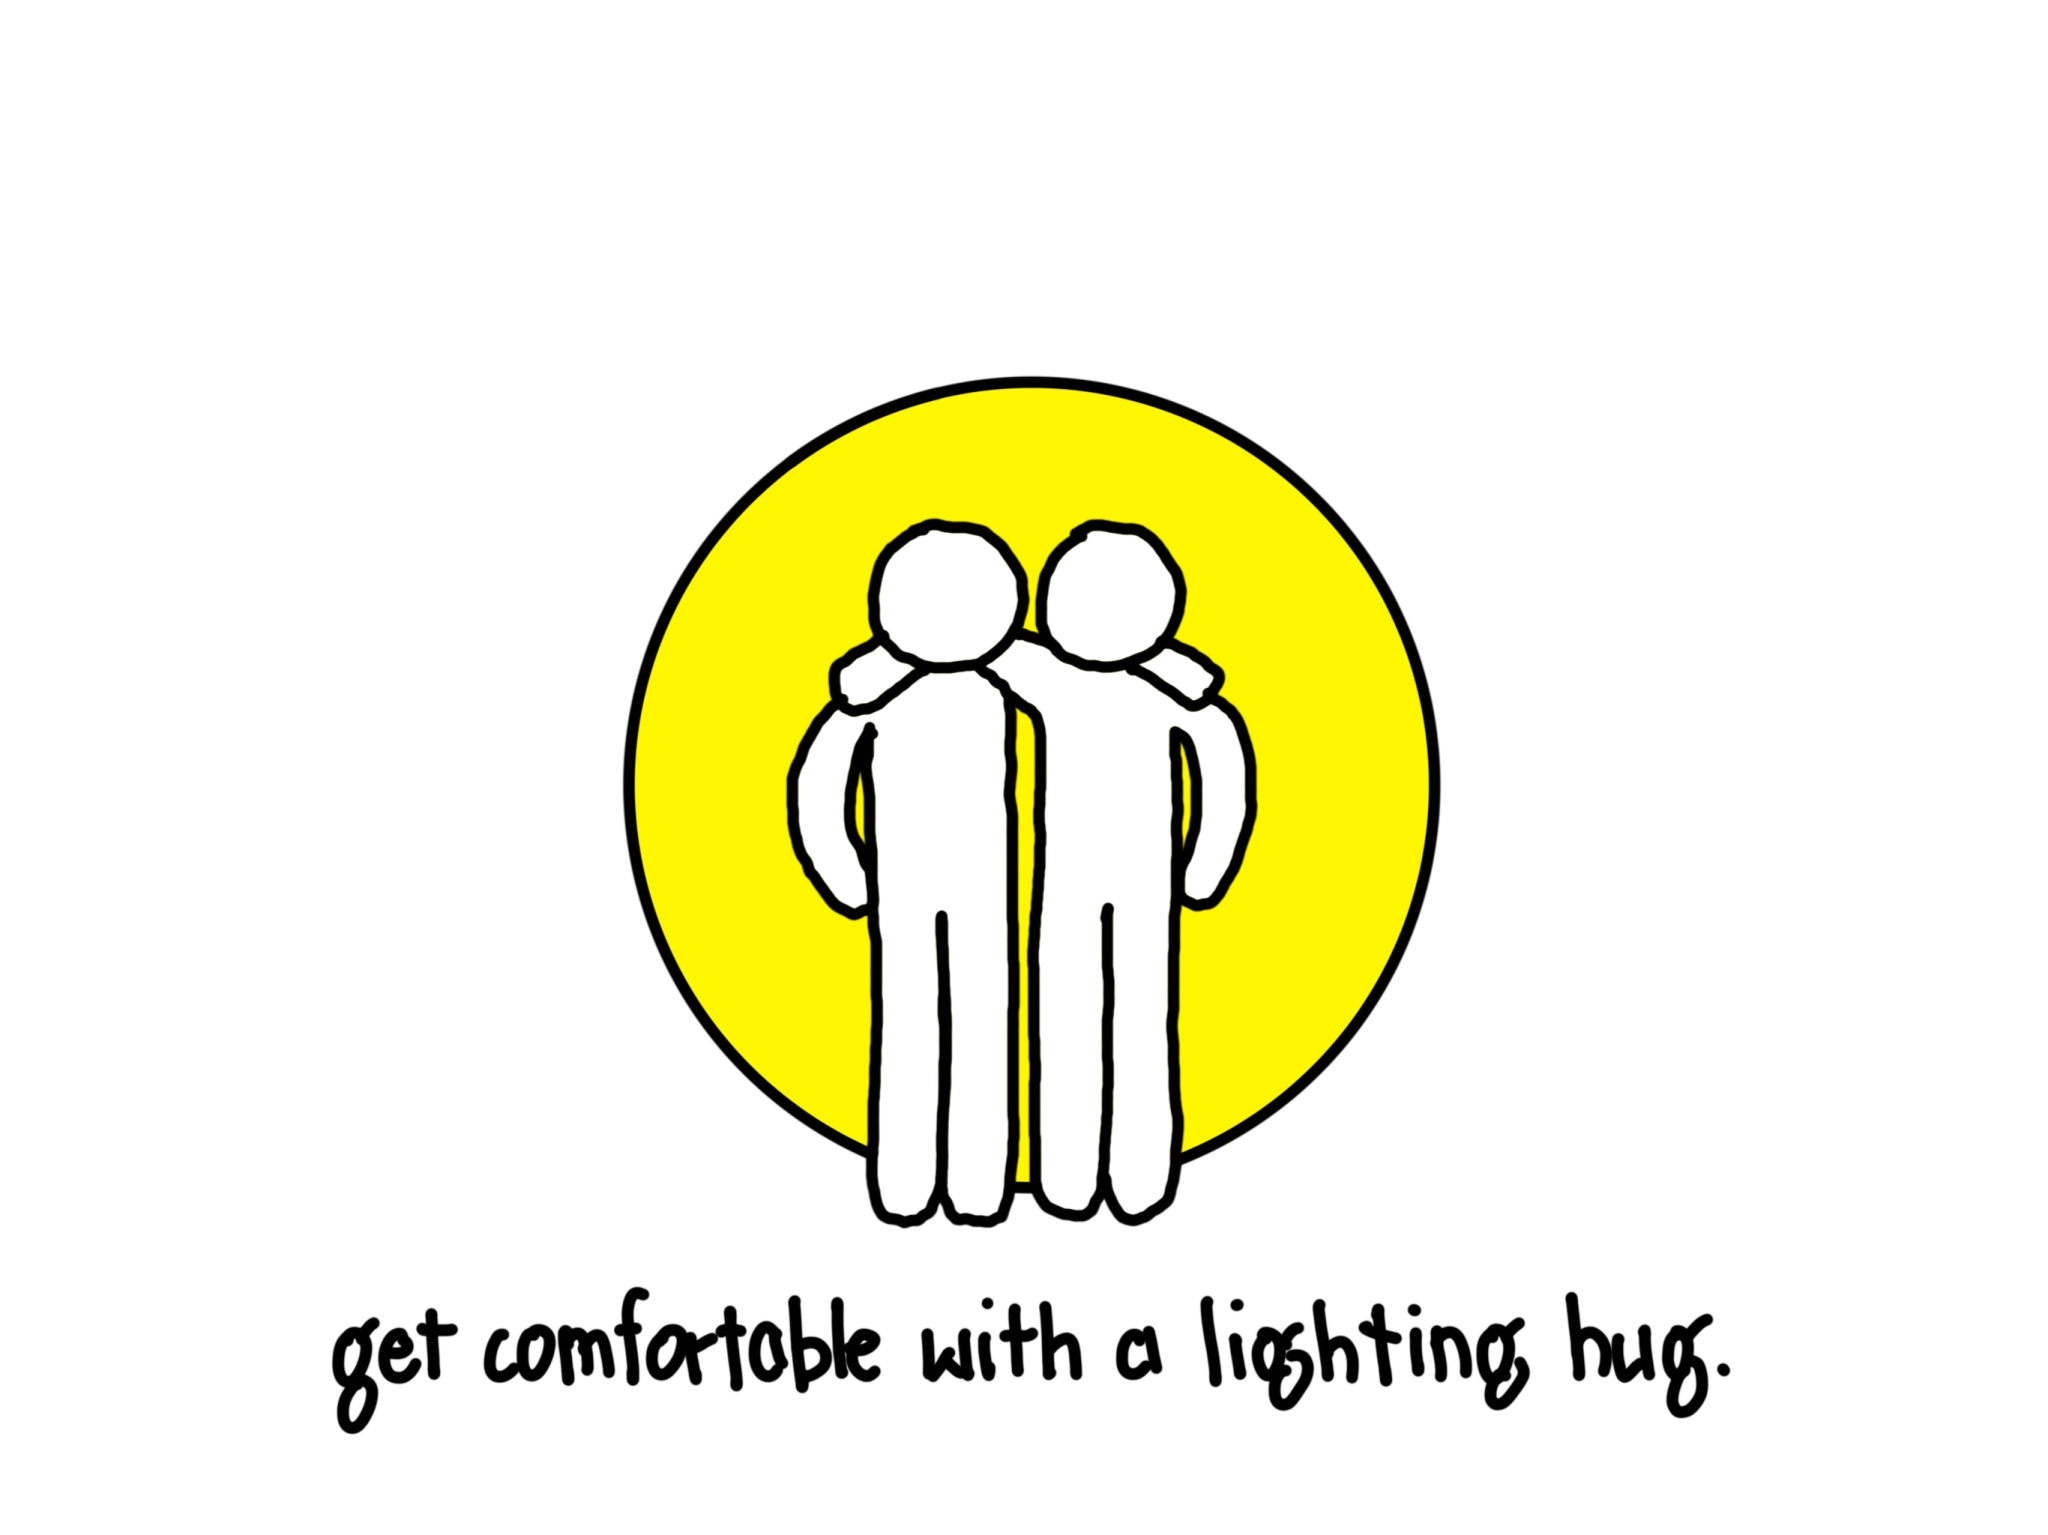 An illustration of two figures with their arms around each others' shoulders. They are encompassed by a bright yellow circle behind them. Below them, script text reads "get comfortable with a lighting hug."